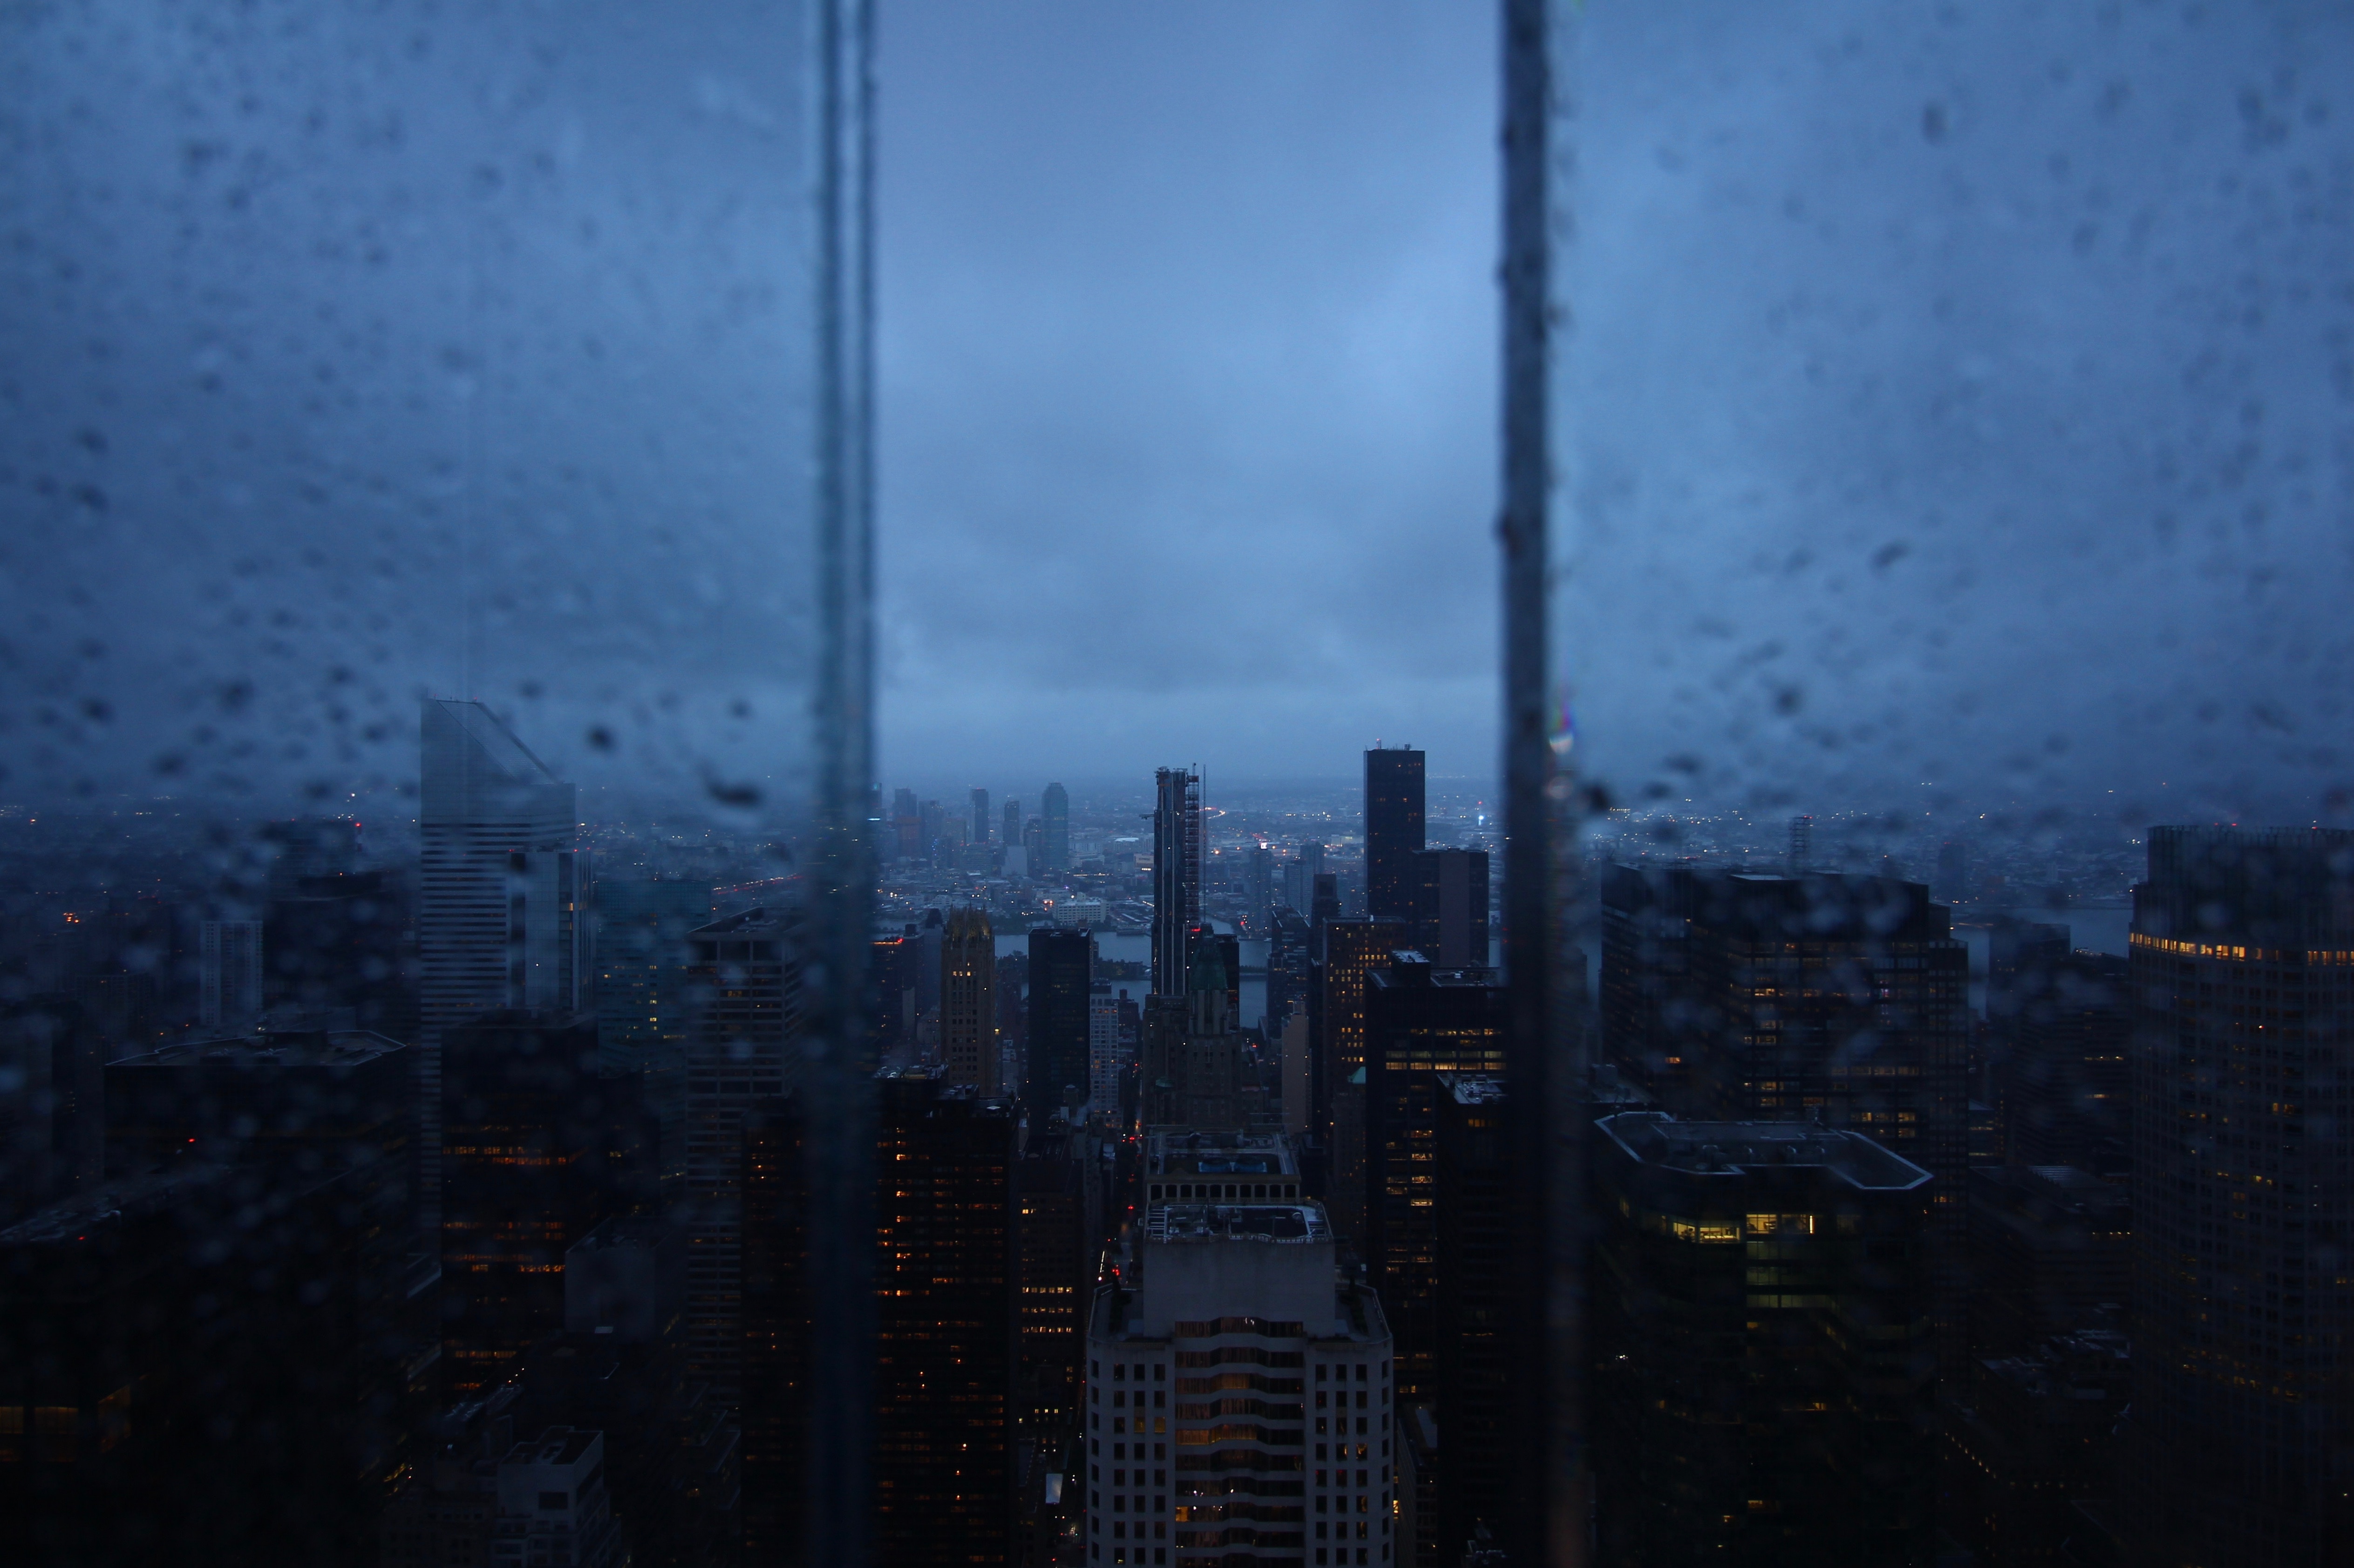 rain, night city, skyscrapers, view from above, window, cities